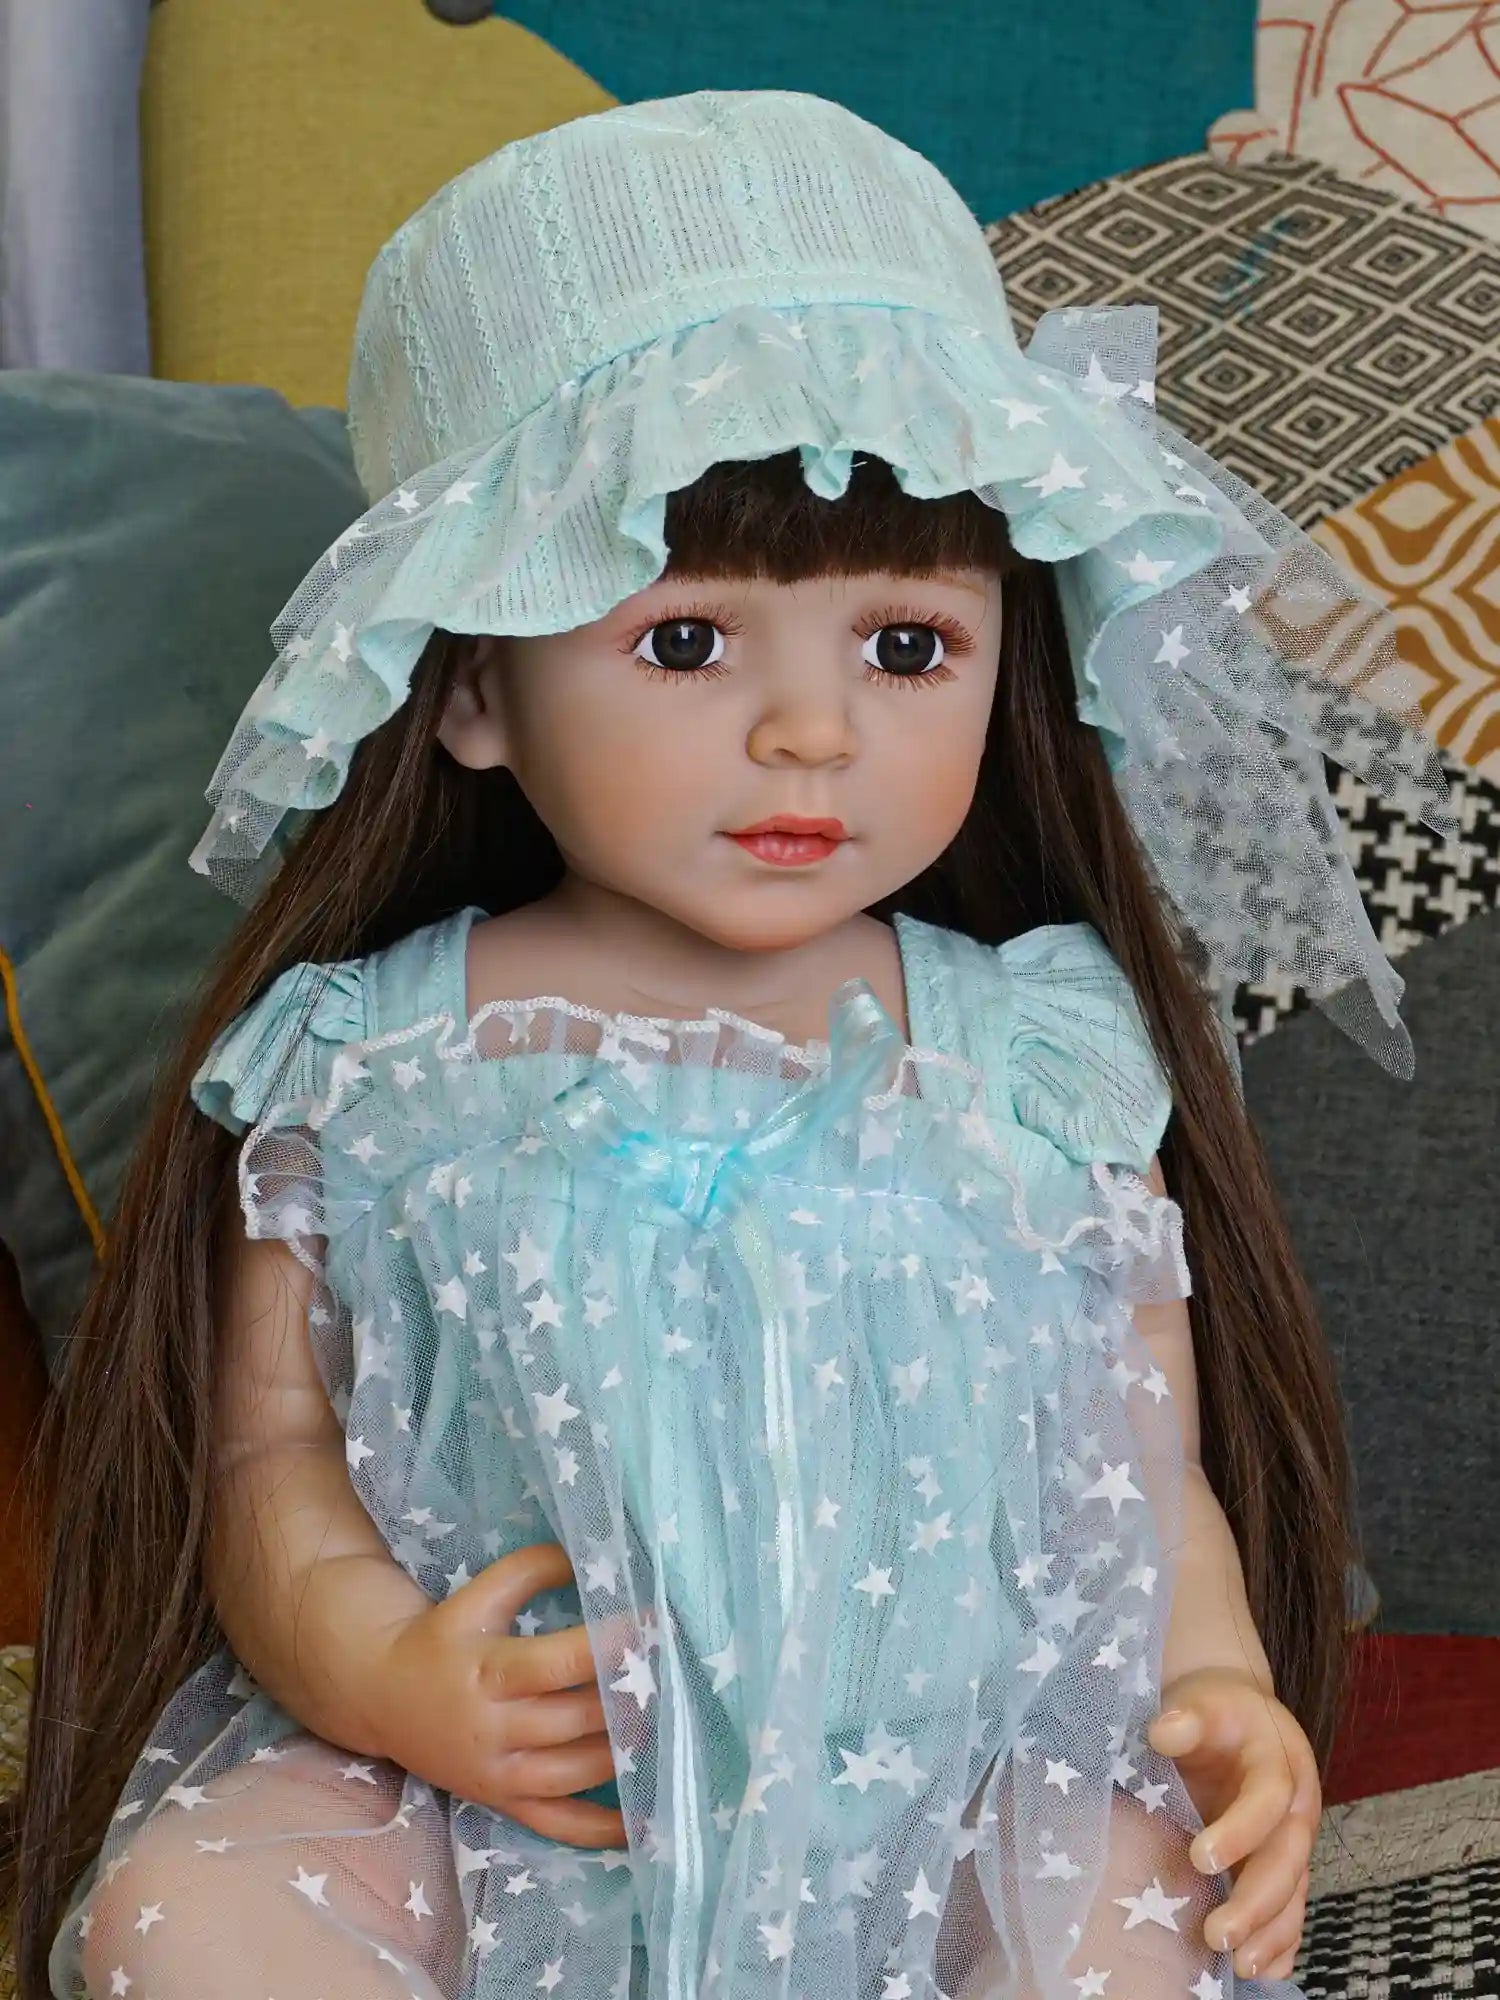 Lifelike doll in a whimsical aqua dress with a frilly bonnet, on a retro chair.